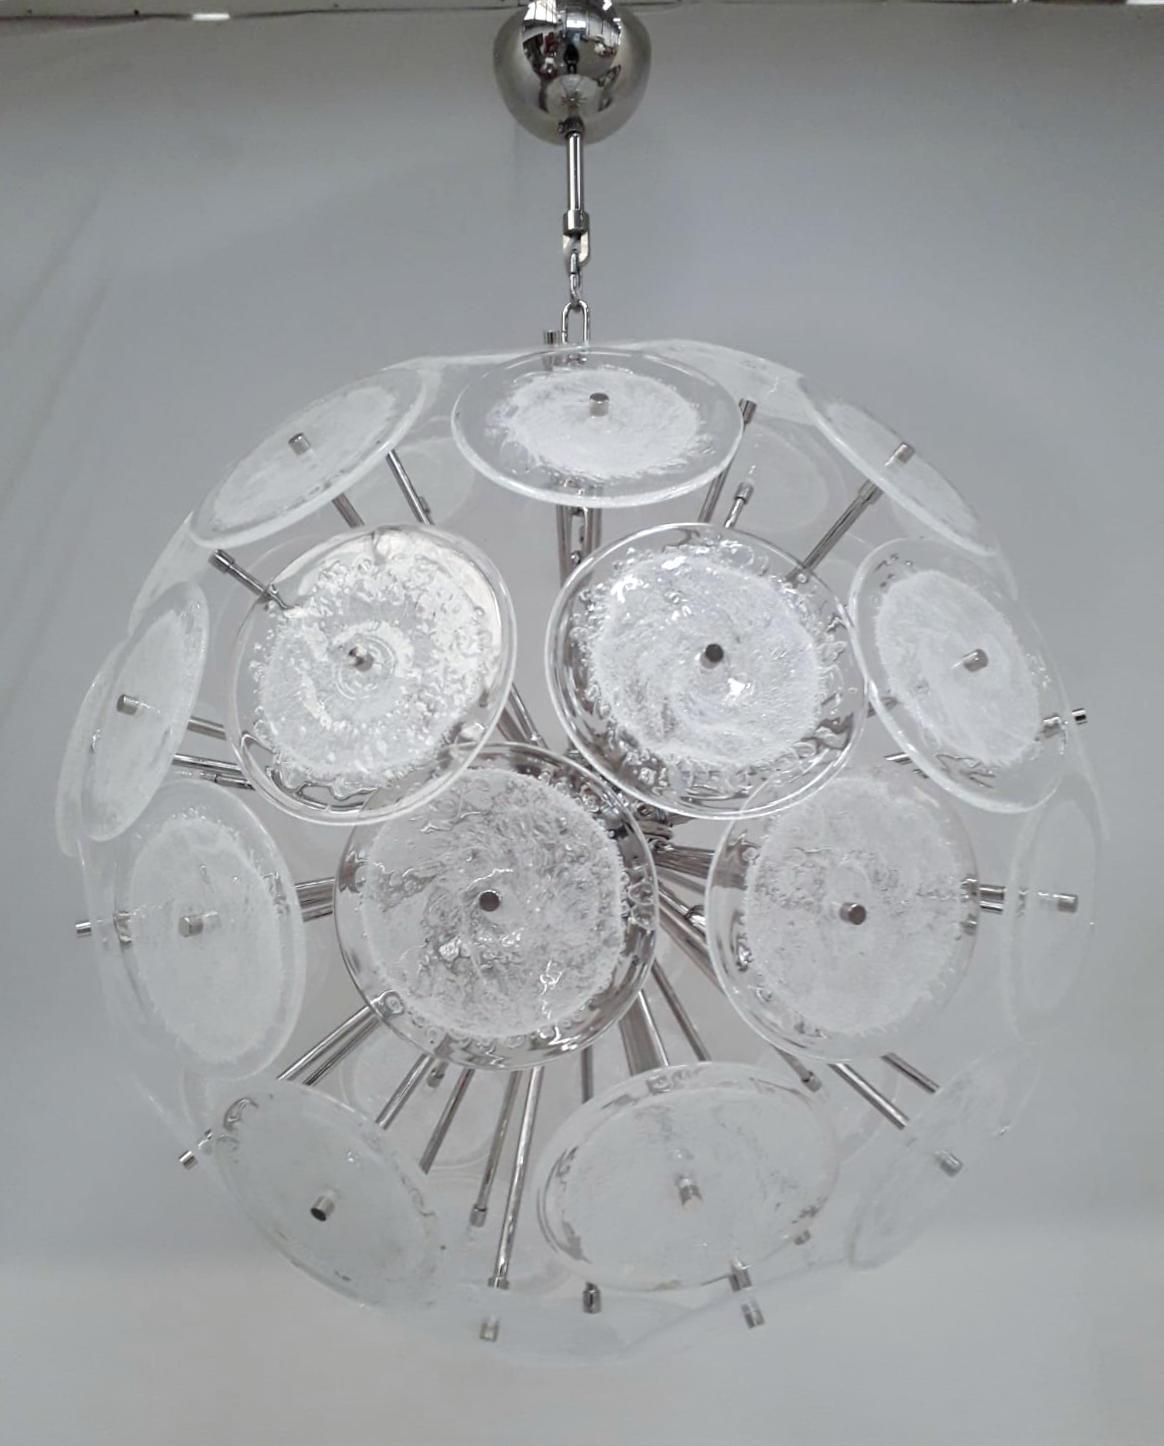 Italian round Sputnik chandelier with clear Murano glass discs hand blown with bubbles using Pulegoso technique, mounted on nickel metal finish frame, by Fabio Ltd, made in Italy
6 lights / E12 or E14 type / max 40W each
Measures: Diameter 27.5